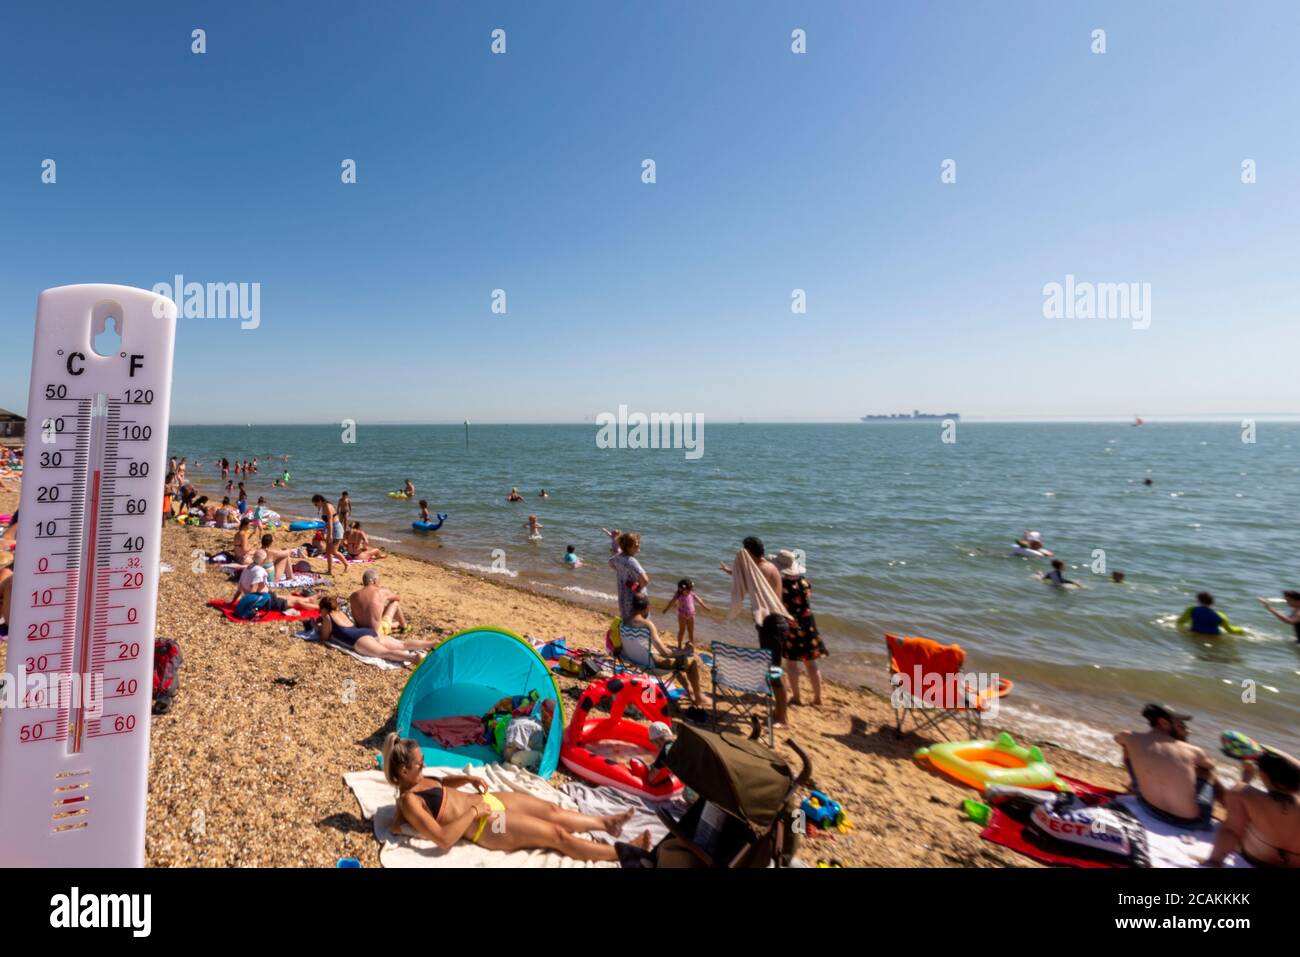 Busy beach on a hot day in Southend on Sea, Essex, UK during the COVID-19 Coronavirus pandemic. Thermometer showing high temperature Stock Photo